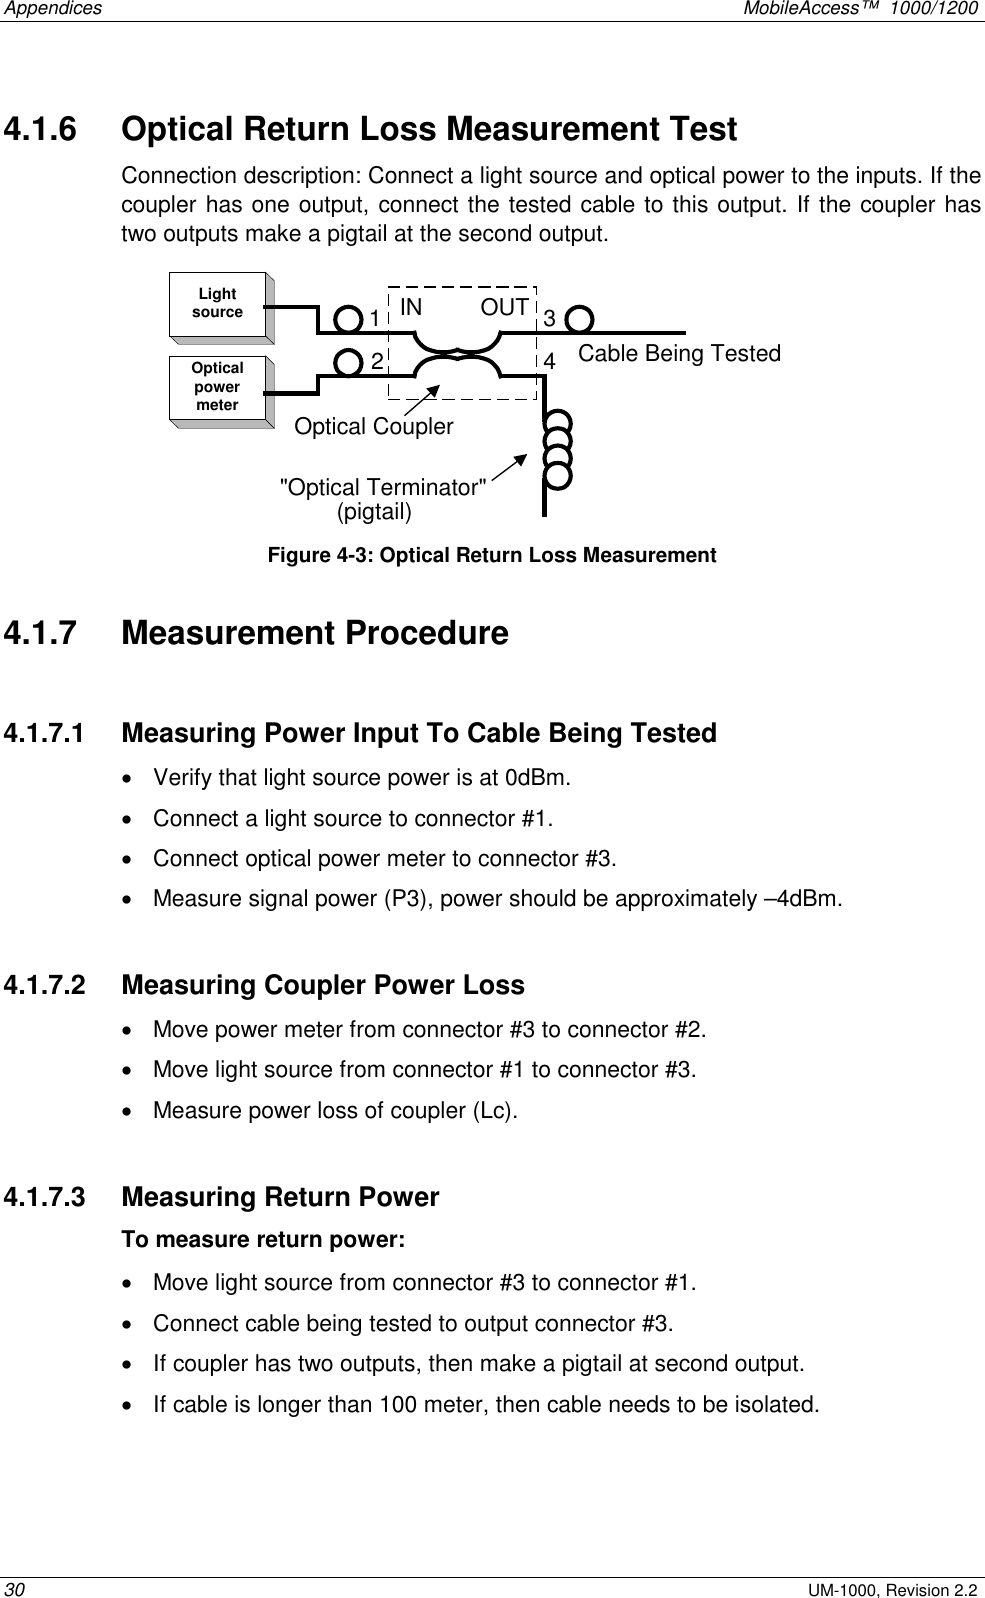 Appendices    MobileAccess™  1000/1200 30 UM-1000, Revision 2.2 4.1.6   Optical Return Loss Measurement Test Connection description: Connect a light source and optical power to the inputs. If the coupler has one output, connect the tested cable to this output. If the coupler has two outputs make a pigtail at the second output. LightsourceOpticalpowermeterIN         OUT(pigtail)Cable Being Tested2134&quot;Optical Terminator&quot;Optical Coupler Figure  4-3: Optical Return Loss Measurement  4.1.7   Measurement Procedure  4.1.7.1   Measuring Power Input To Cable Being Tested •  Verify that light source power is at 0dBm. •  Connect a light source to connector #1.  •  Connect optical power meter to connector #3. •  Measure signal power (P3), power should be approximately –4dBm.  4.1.7.2   Measuring Coupler Power Loss •  Move power meter from connector #3 to connector #2. •  Move light source from connector #1 to connector #3. •  Measure power loss of coupler (Lc).  4.1.7.3   Measuring Return Power To measure return power: •  Move light source from connector #3 to connector #1. •  Connect cable being tested to output connector #3. •  If coupler has two outputs, then make a pigtail at second output. •  If cable is longer than 100 meter, then cable needs to be isolated.  